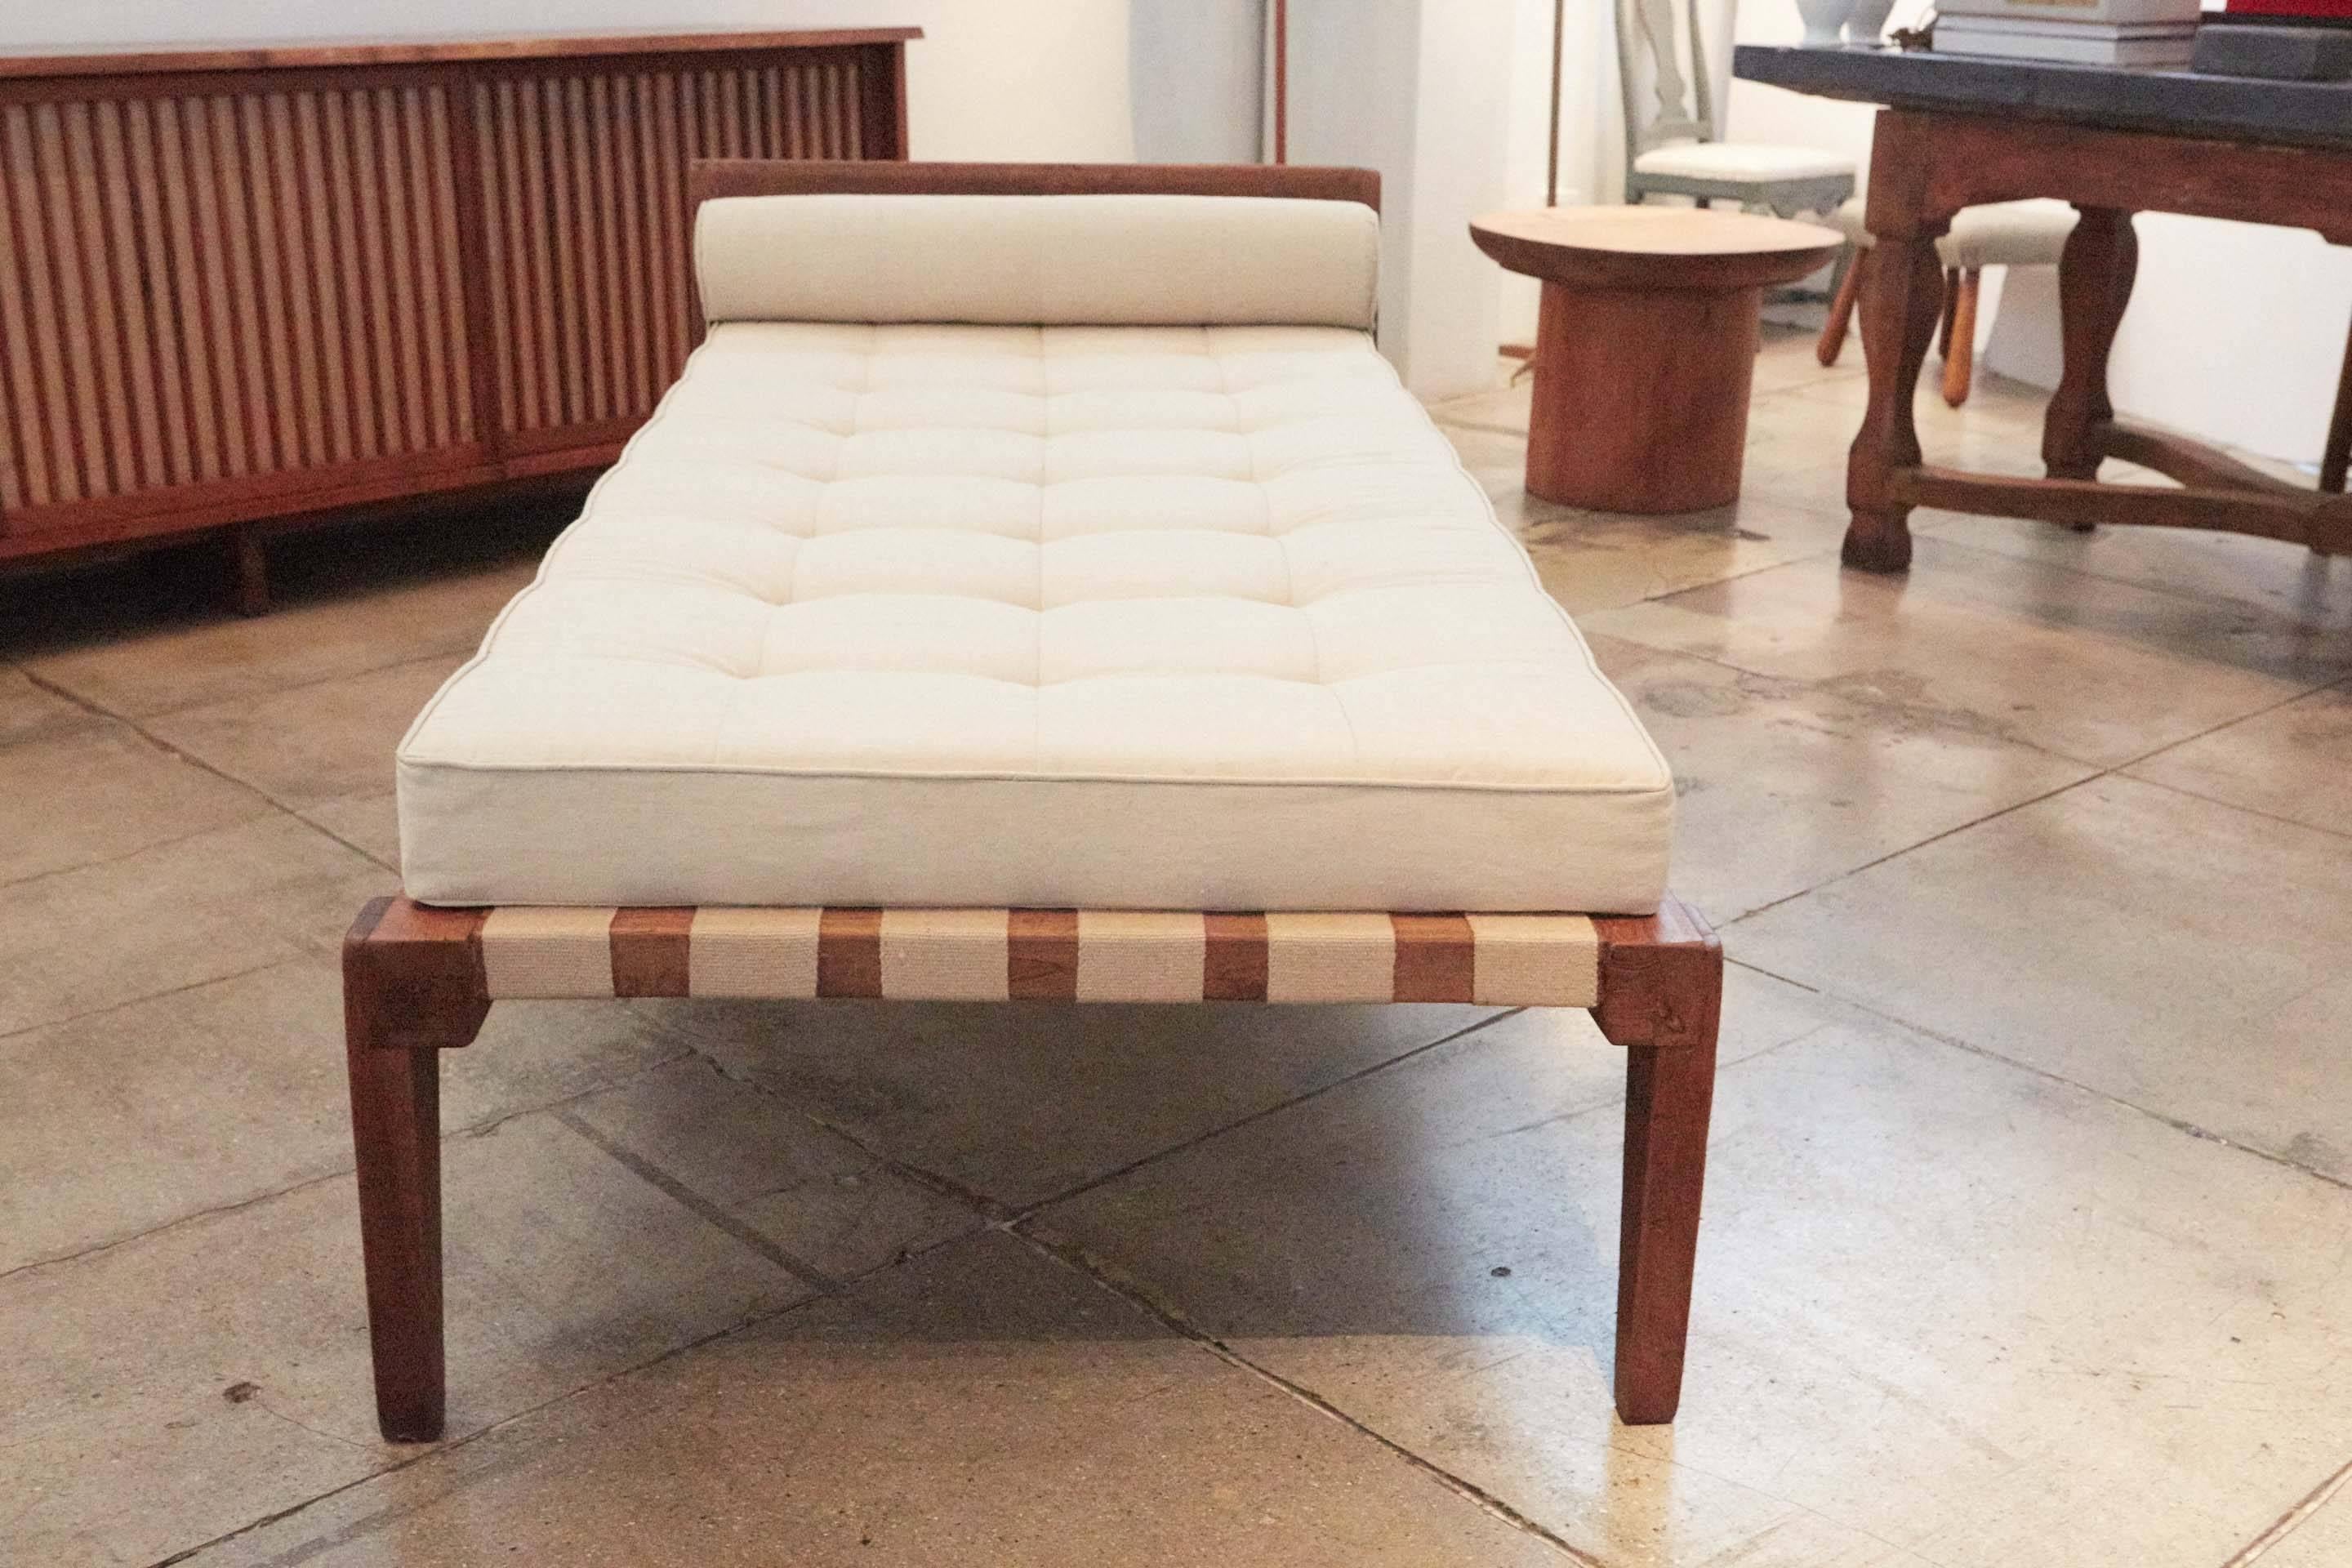 A beautifully toned daybed from Chandigarh University, not overly stained.